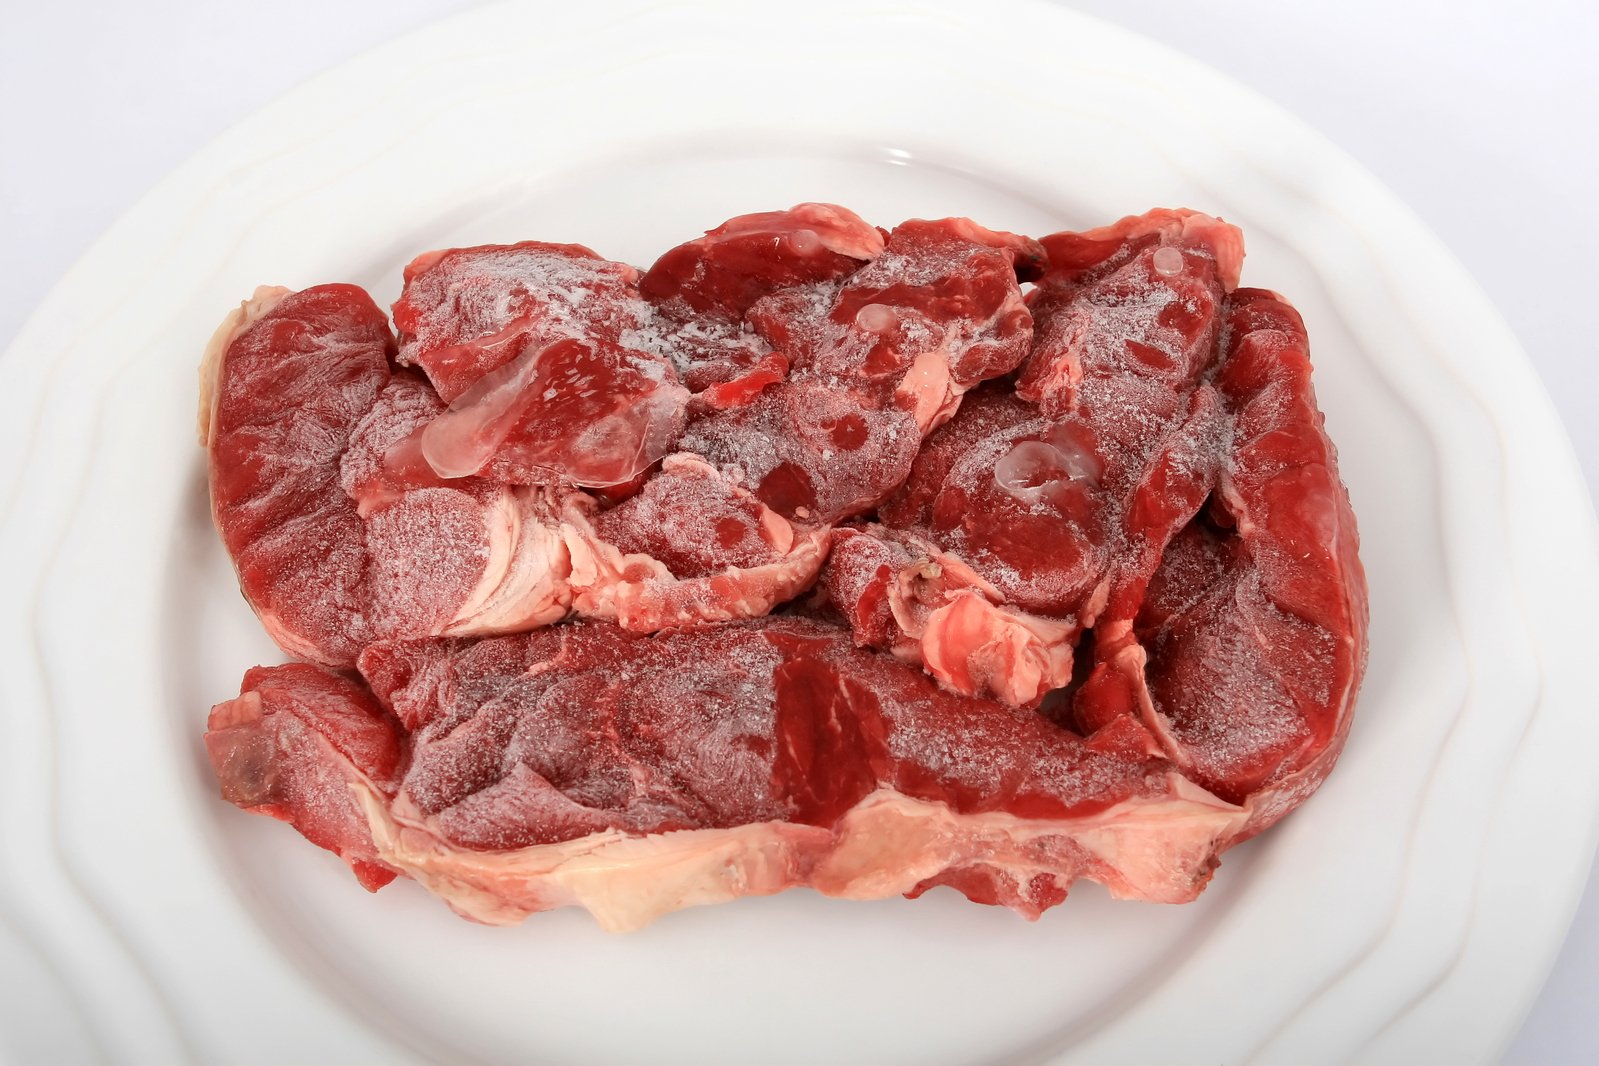 a pile of raw meat sitting on top of a white plate